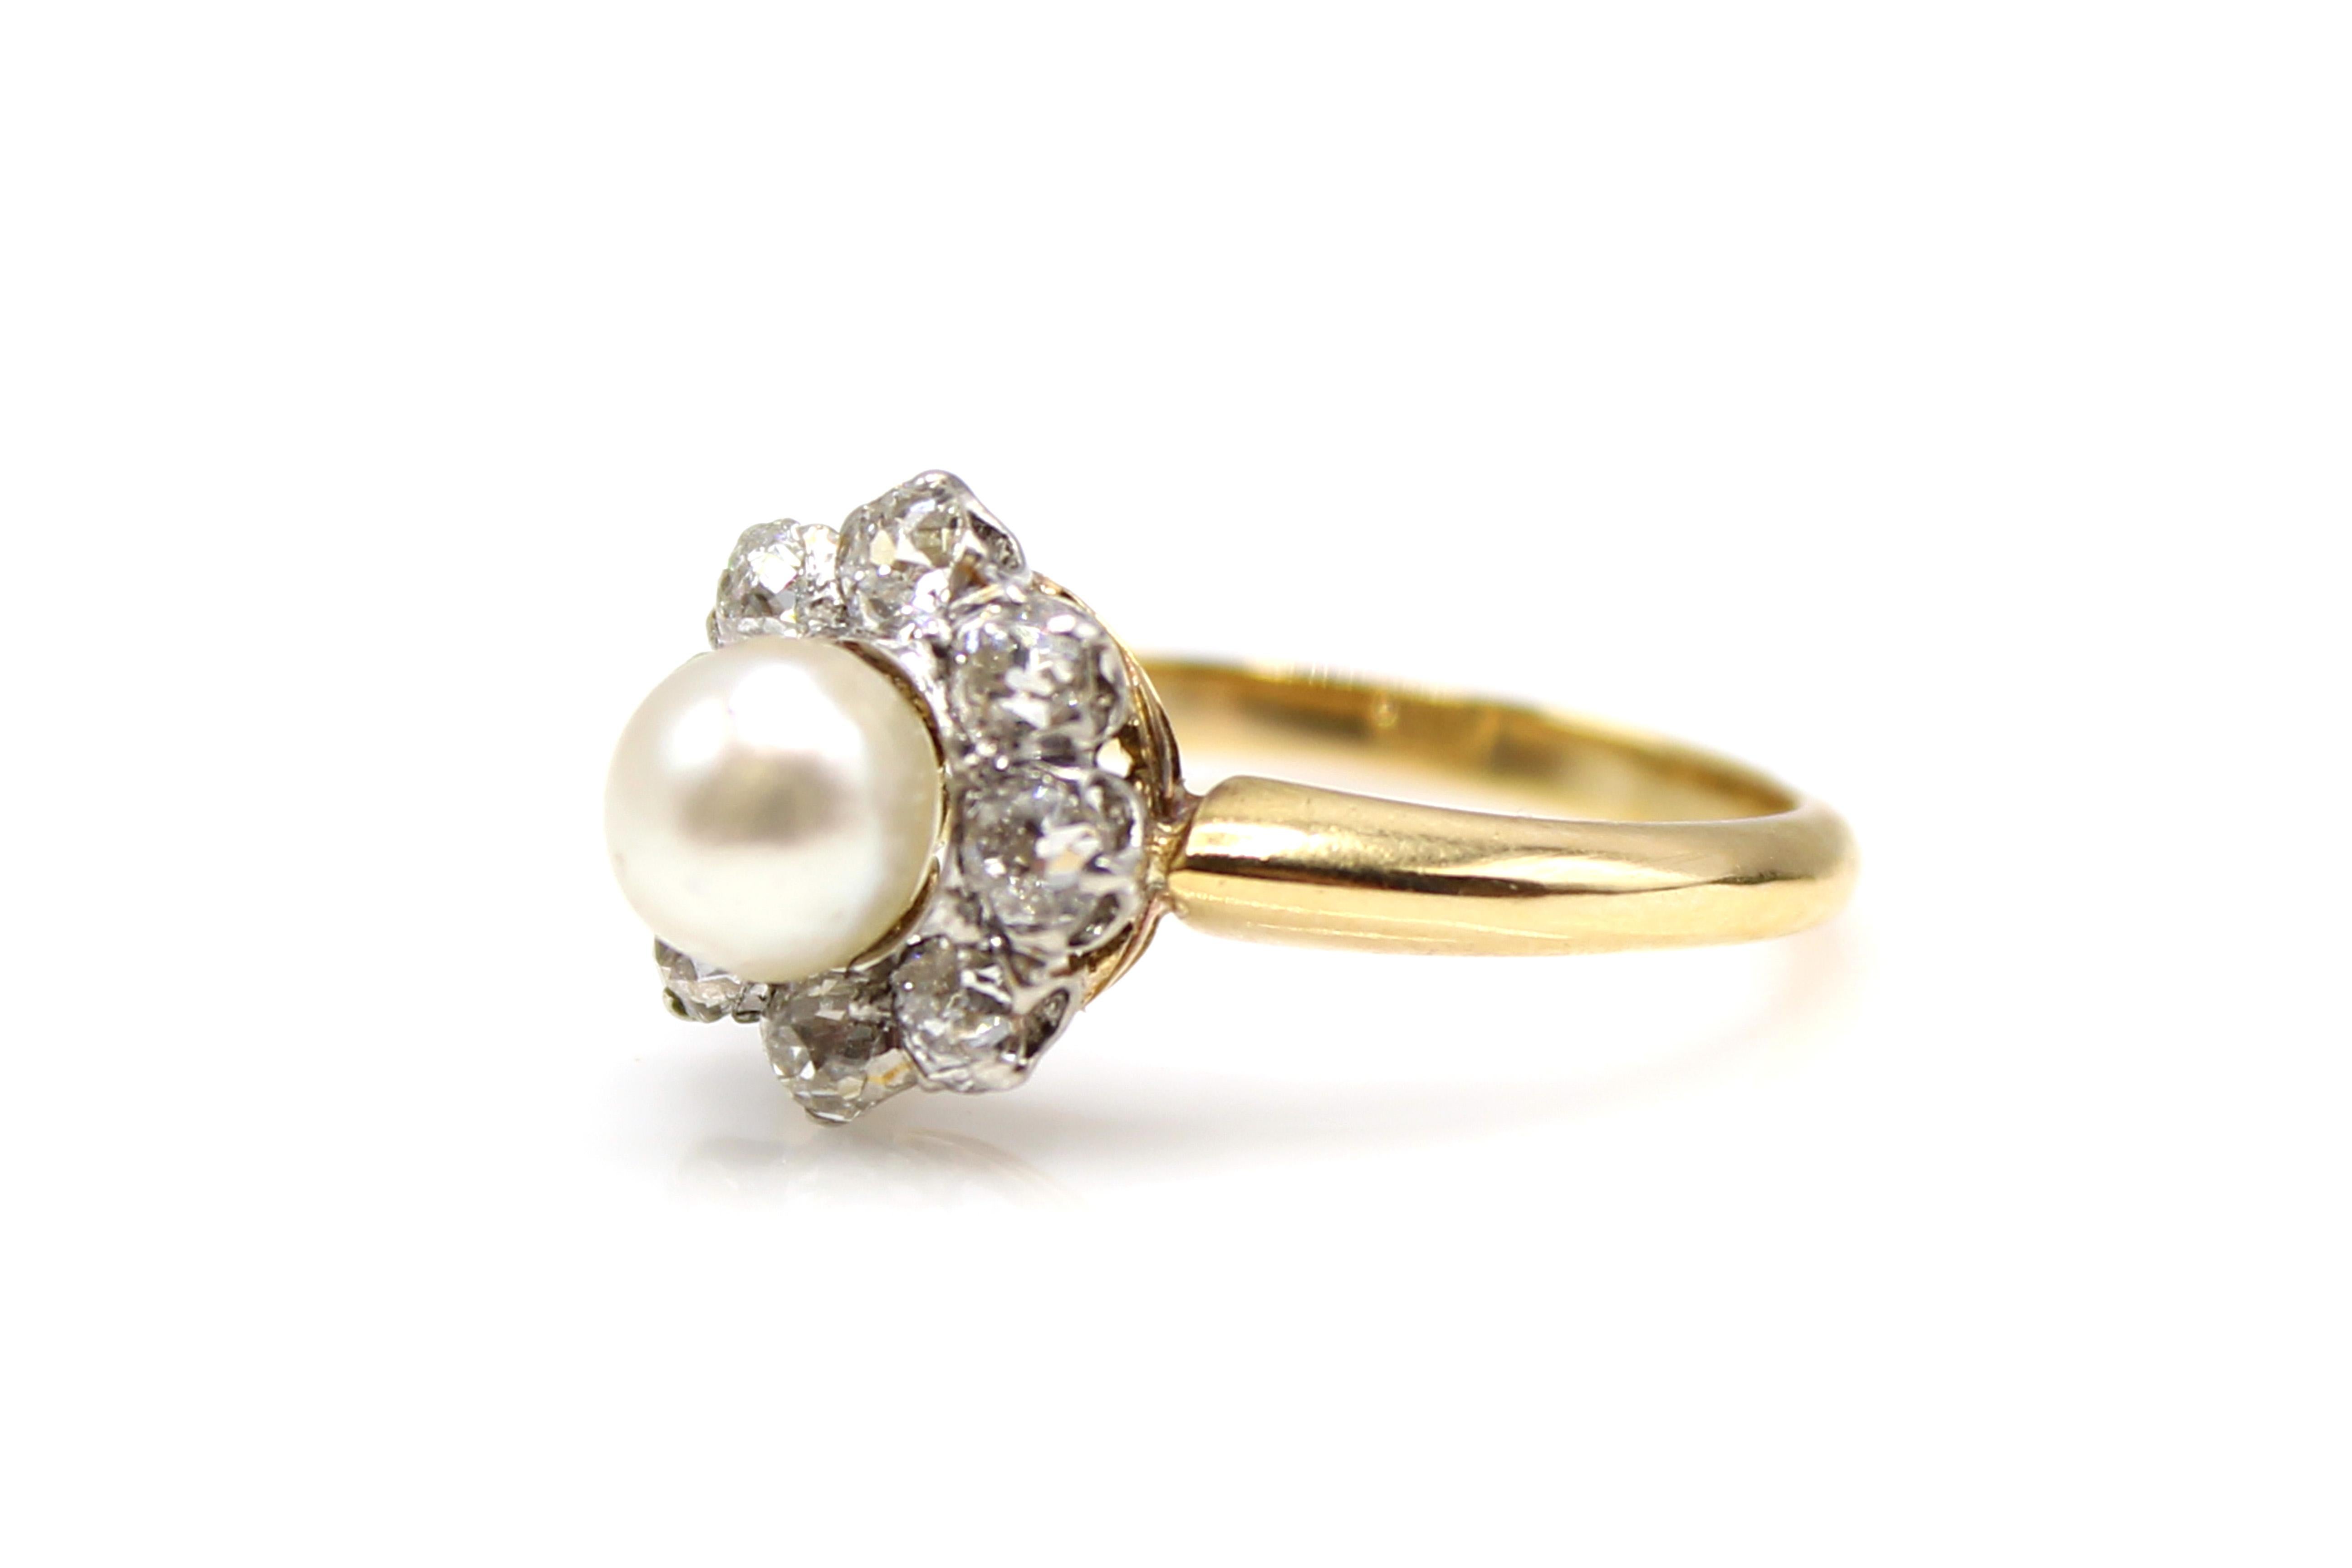 Amazingly well hand-crafted this charming Victorian ring from ca 1880 is crafted in platinum topped 18 karat yellow gold. 8 bright white and sparkly Old European cut diamonds are prong set around 1 larger 5.7 mm pearl, reminding one of a flower with